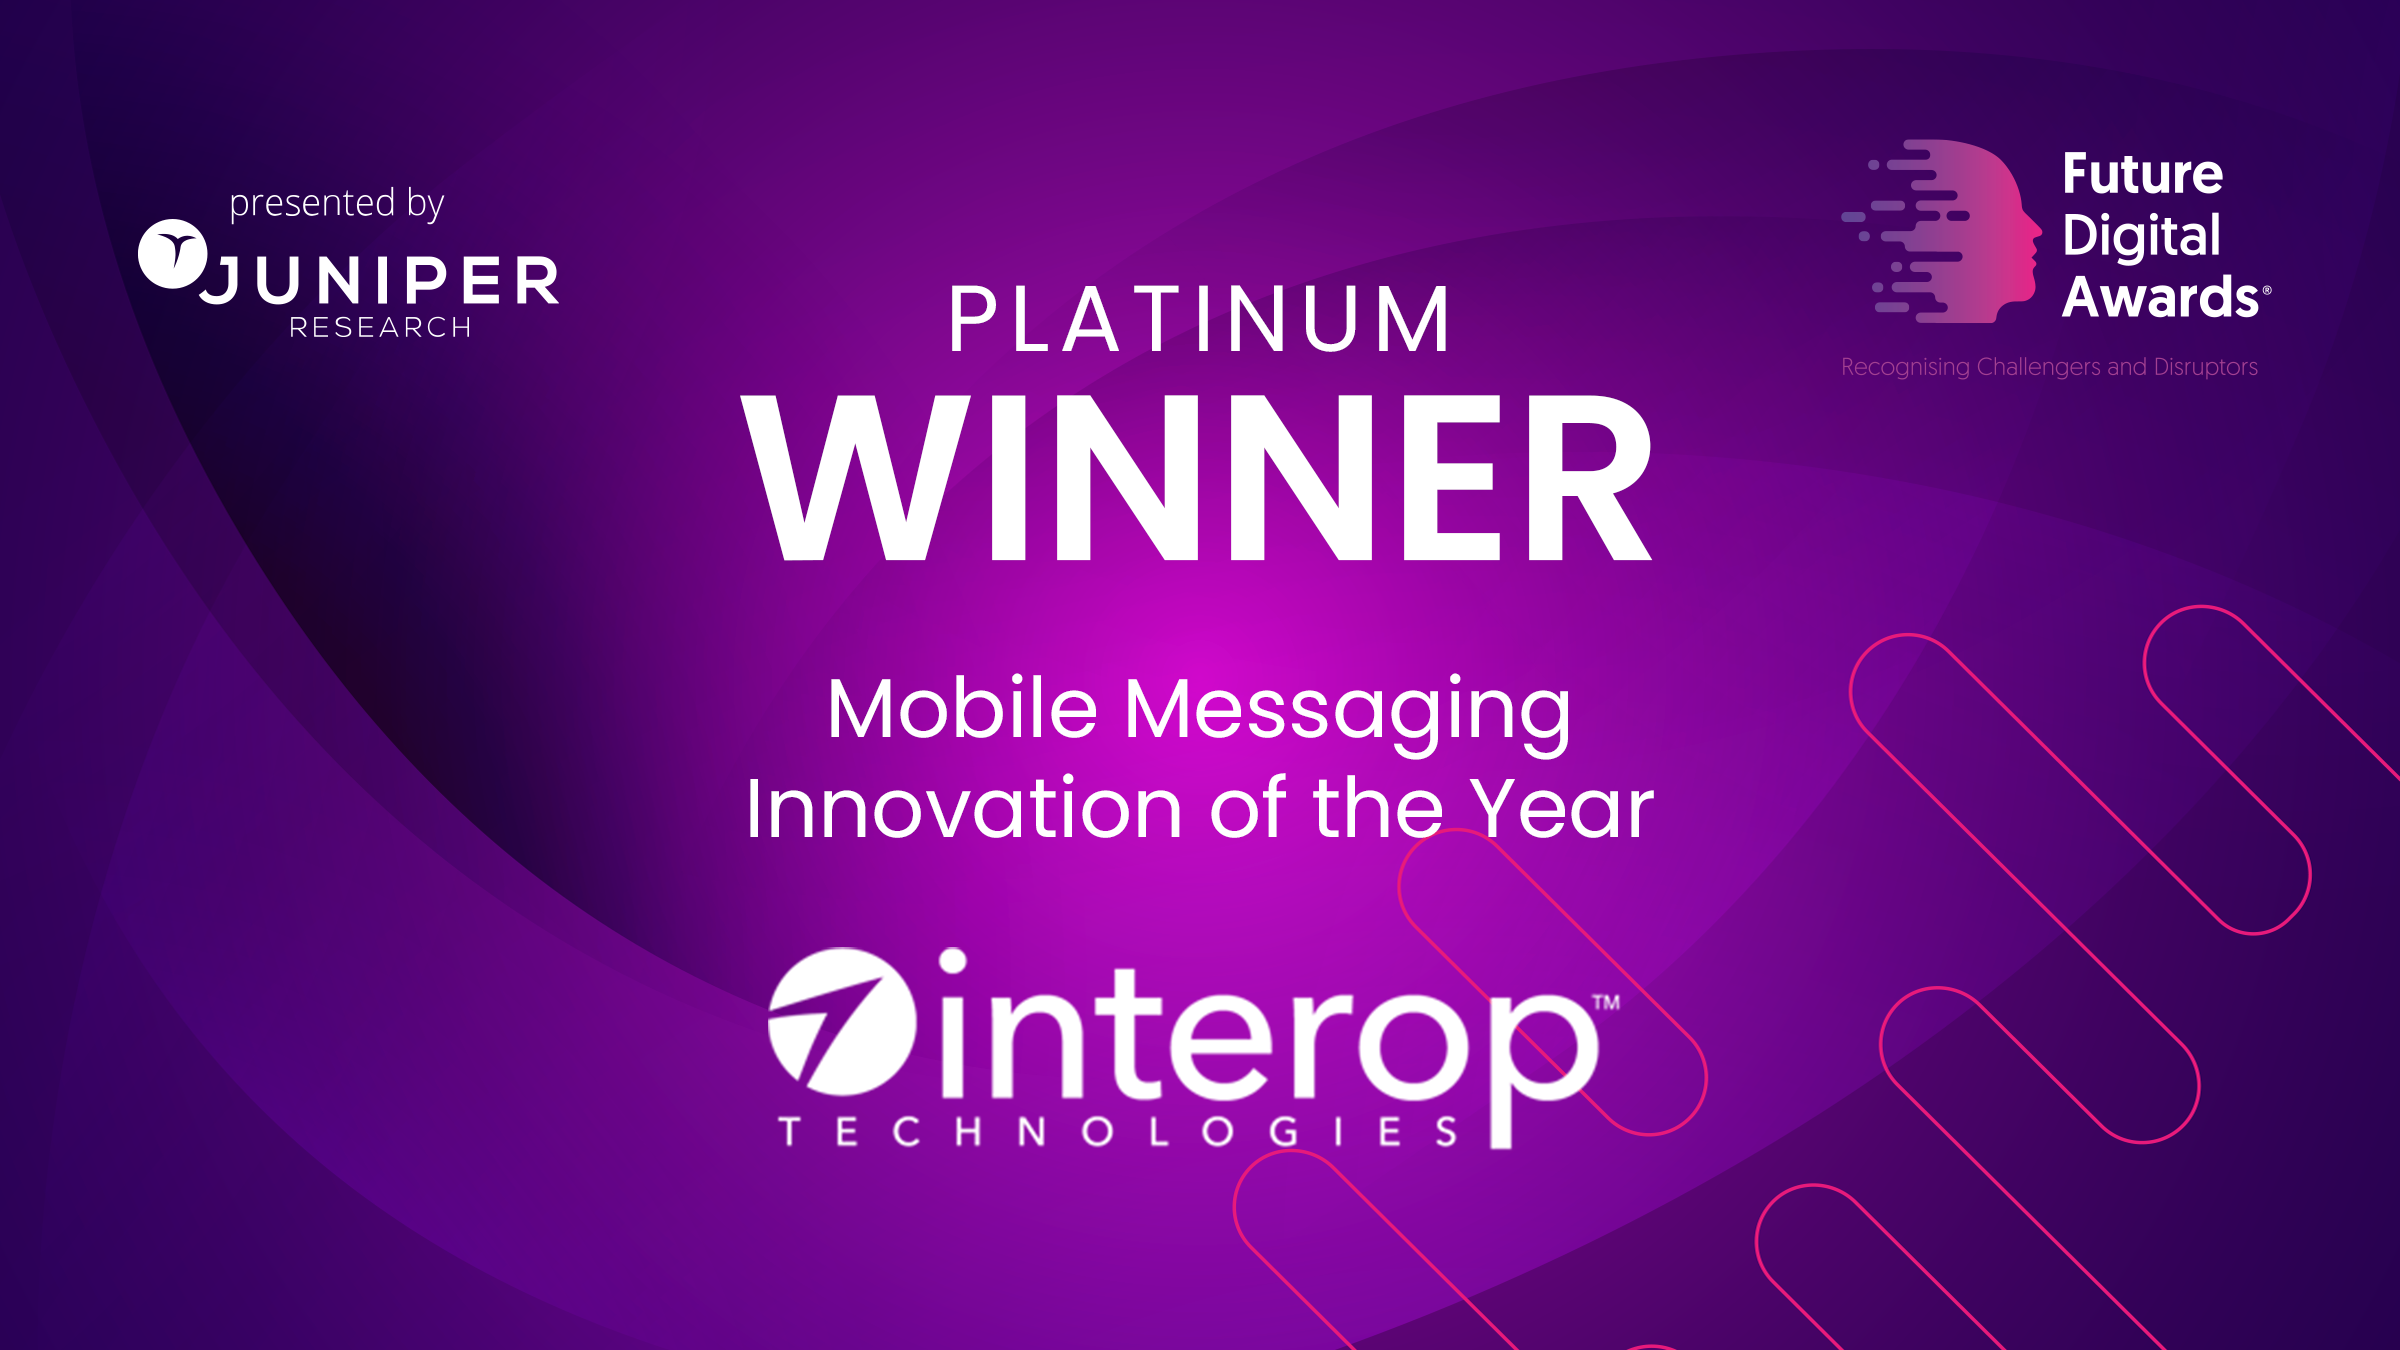 Interop Technologies Wins Mobile Messaging Innovation of the Year